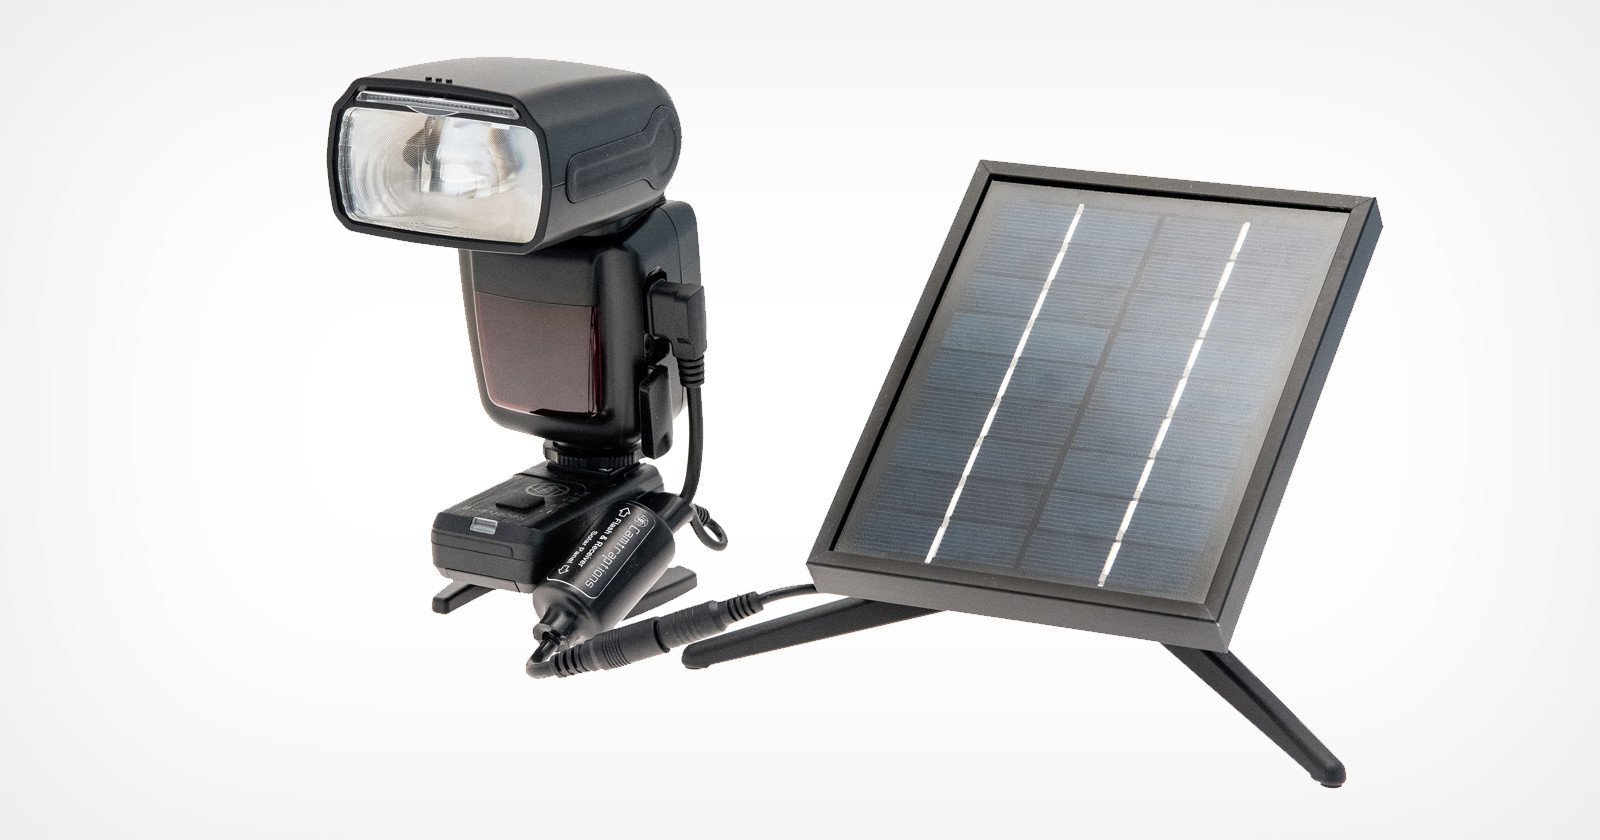 Camtraptions Launches Solar Panel for Camera Trap Speedlights